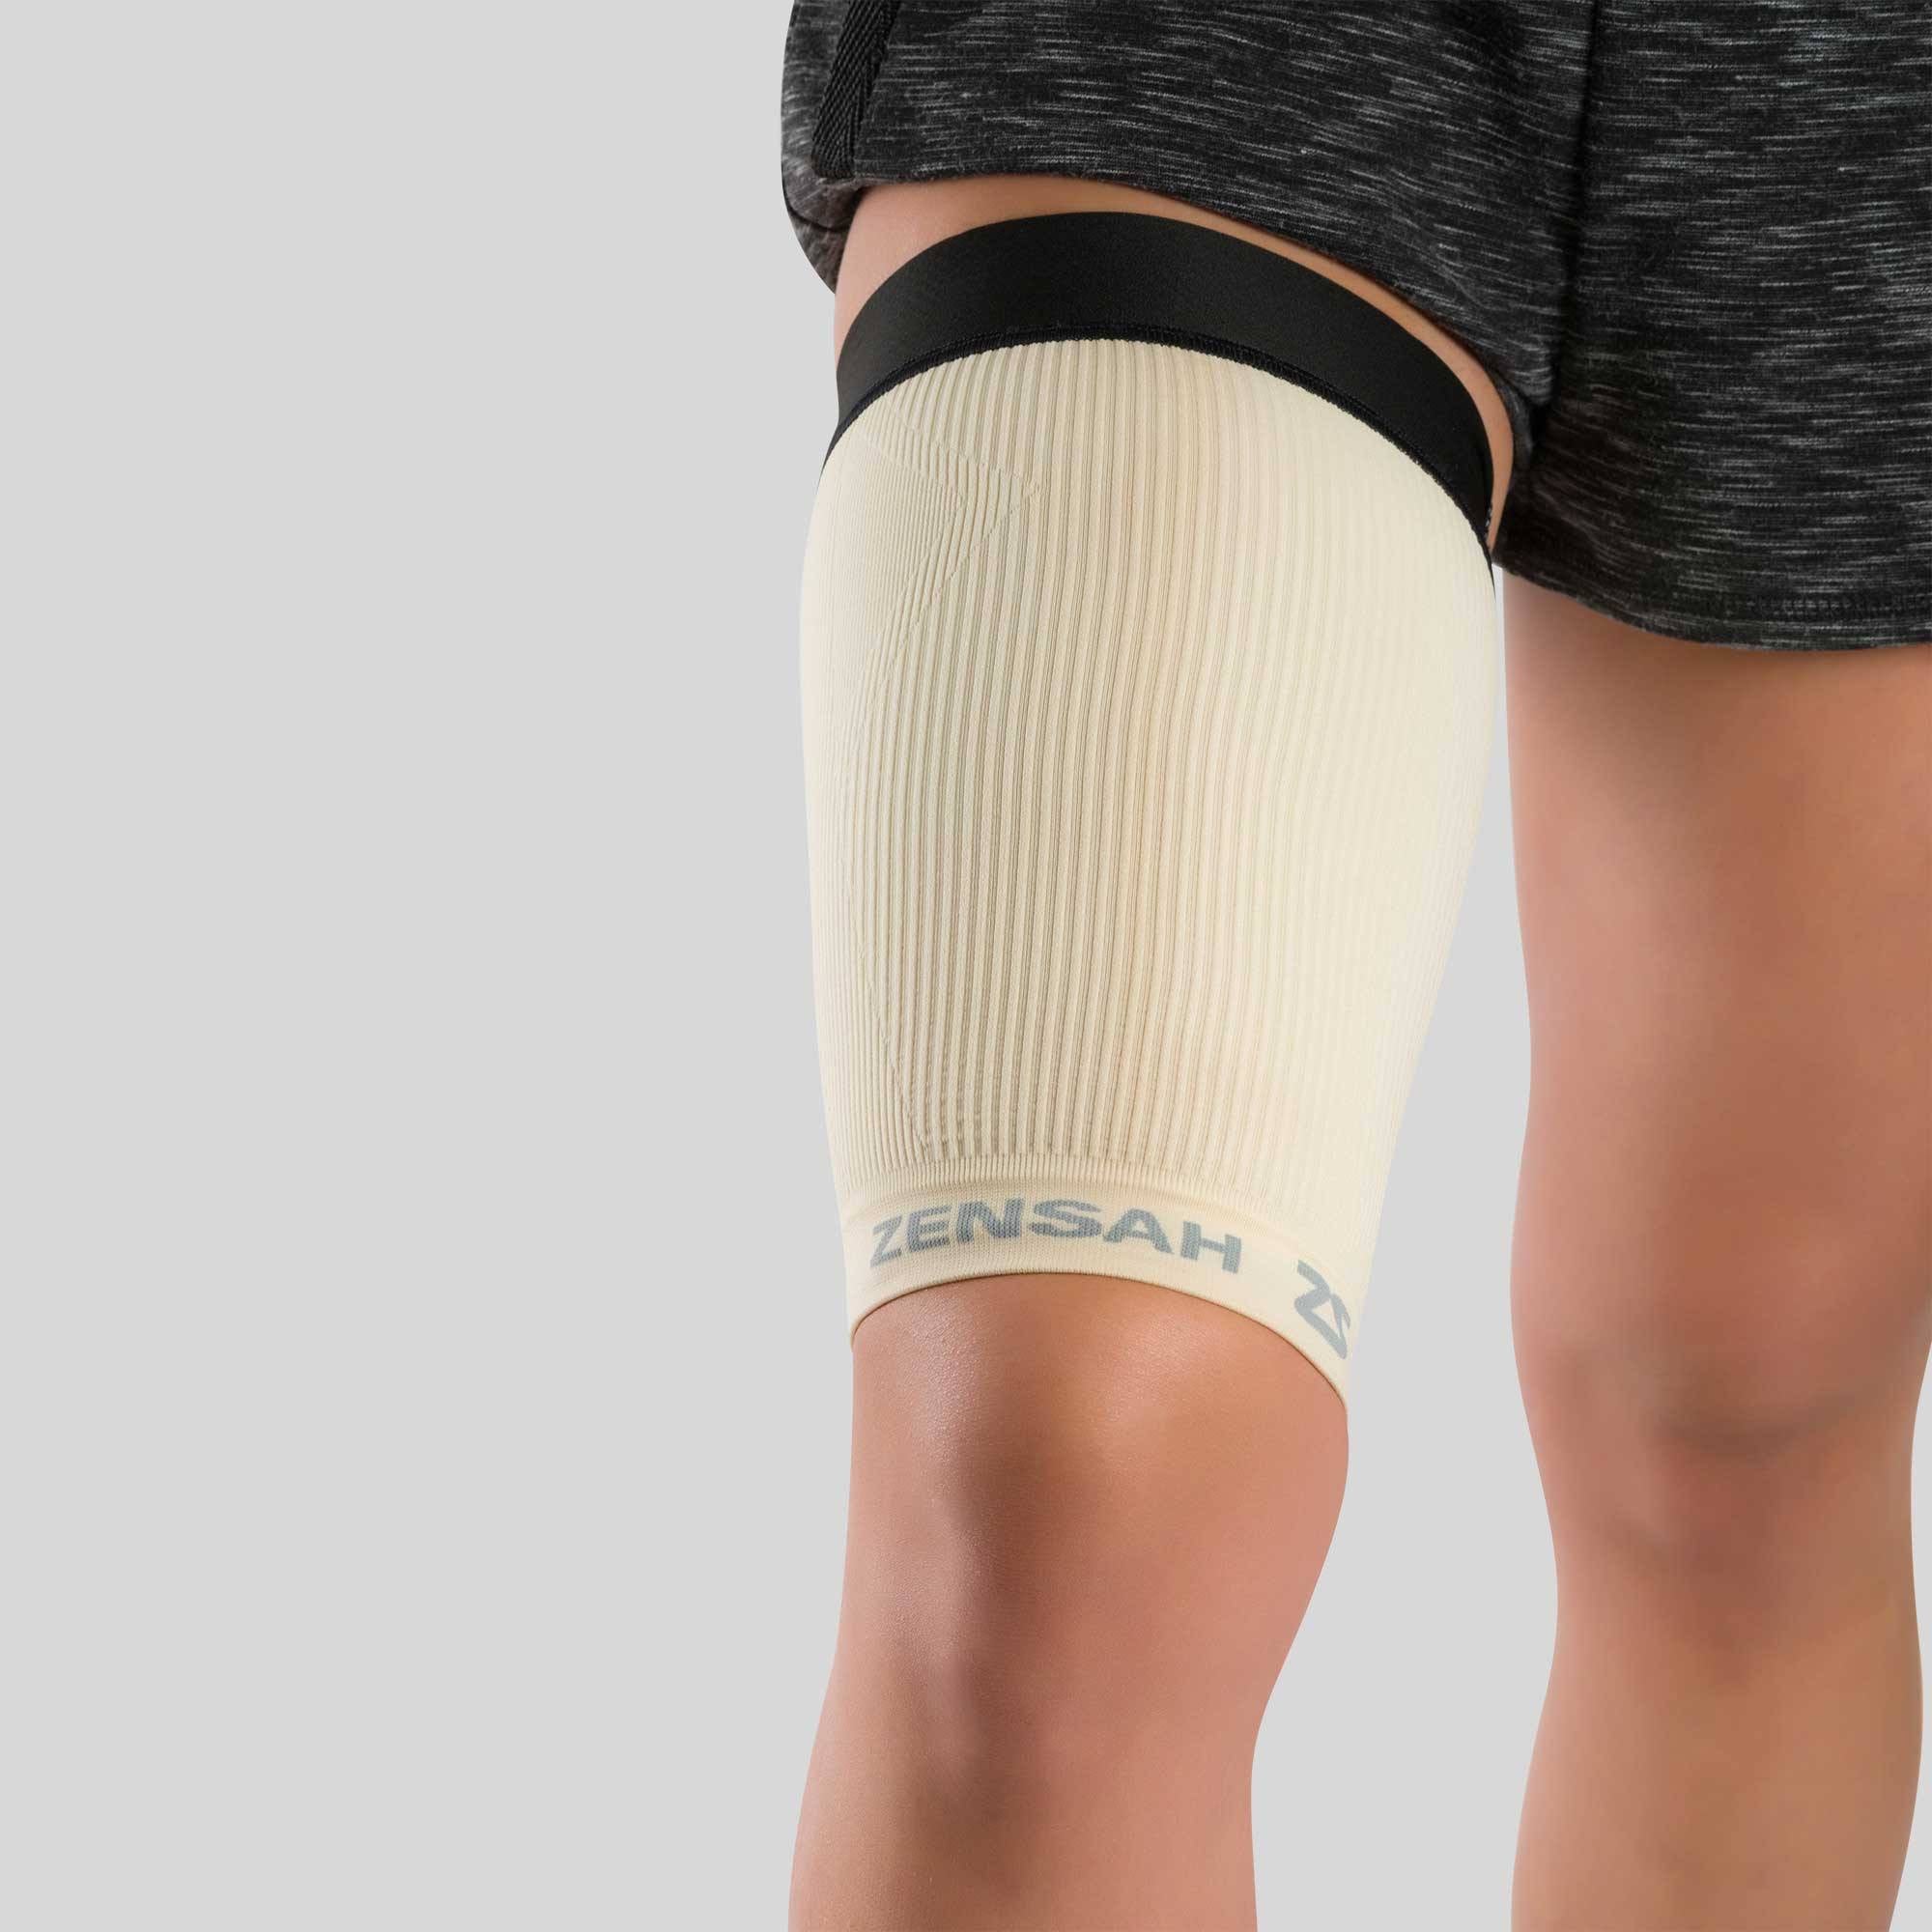 Thigh Compression Sleeve - Thigh Compression Online Store